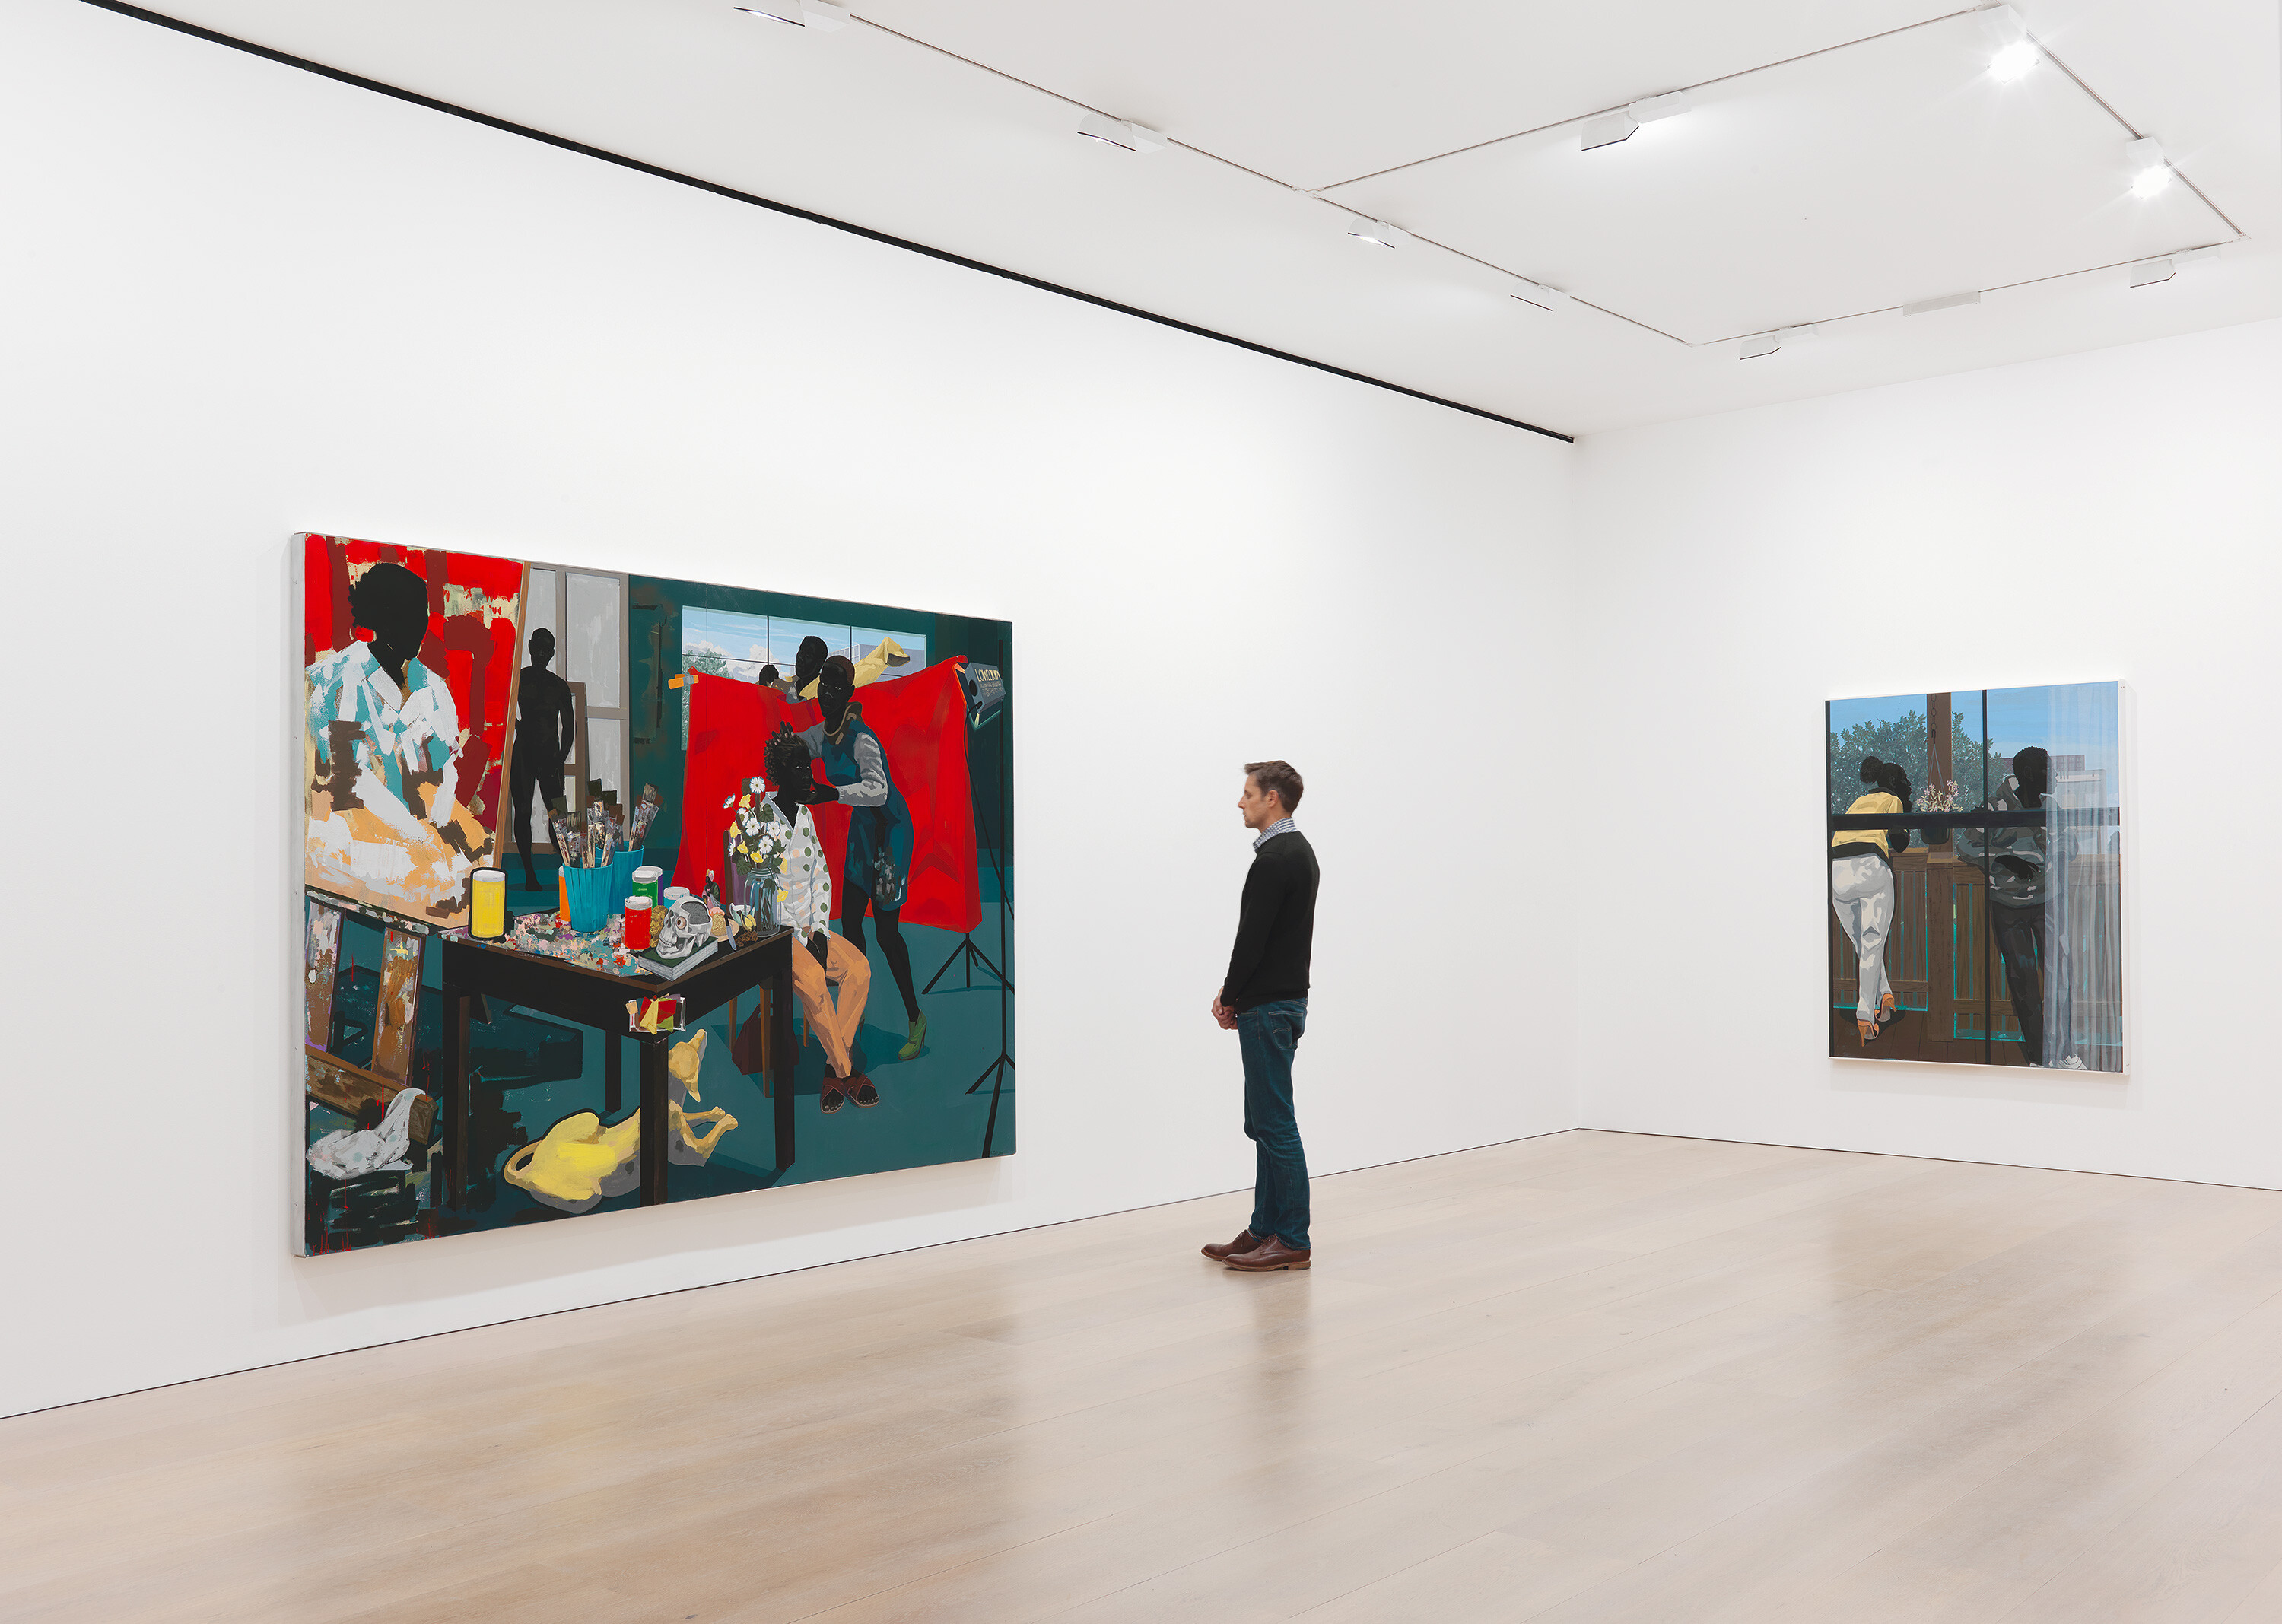 An installation view of the exhibition Kerry James Marshall: Look See, at David Zwirner London, dated 2014.